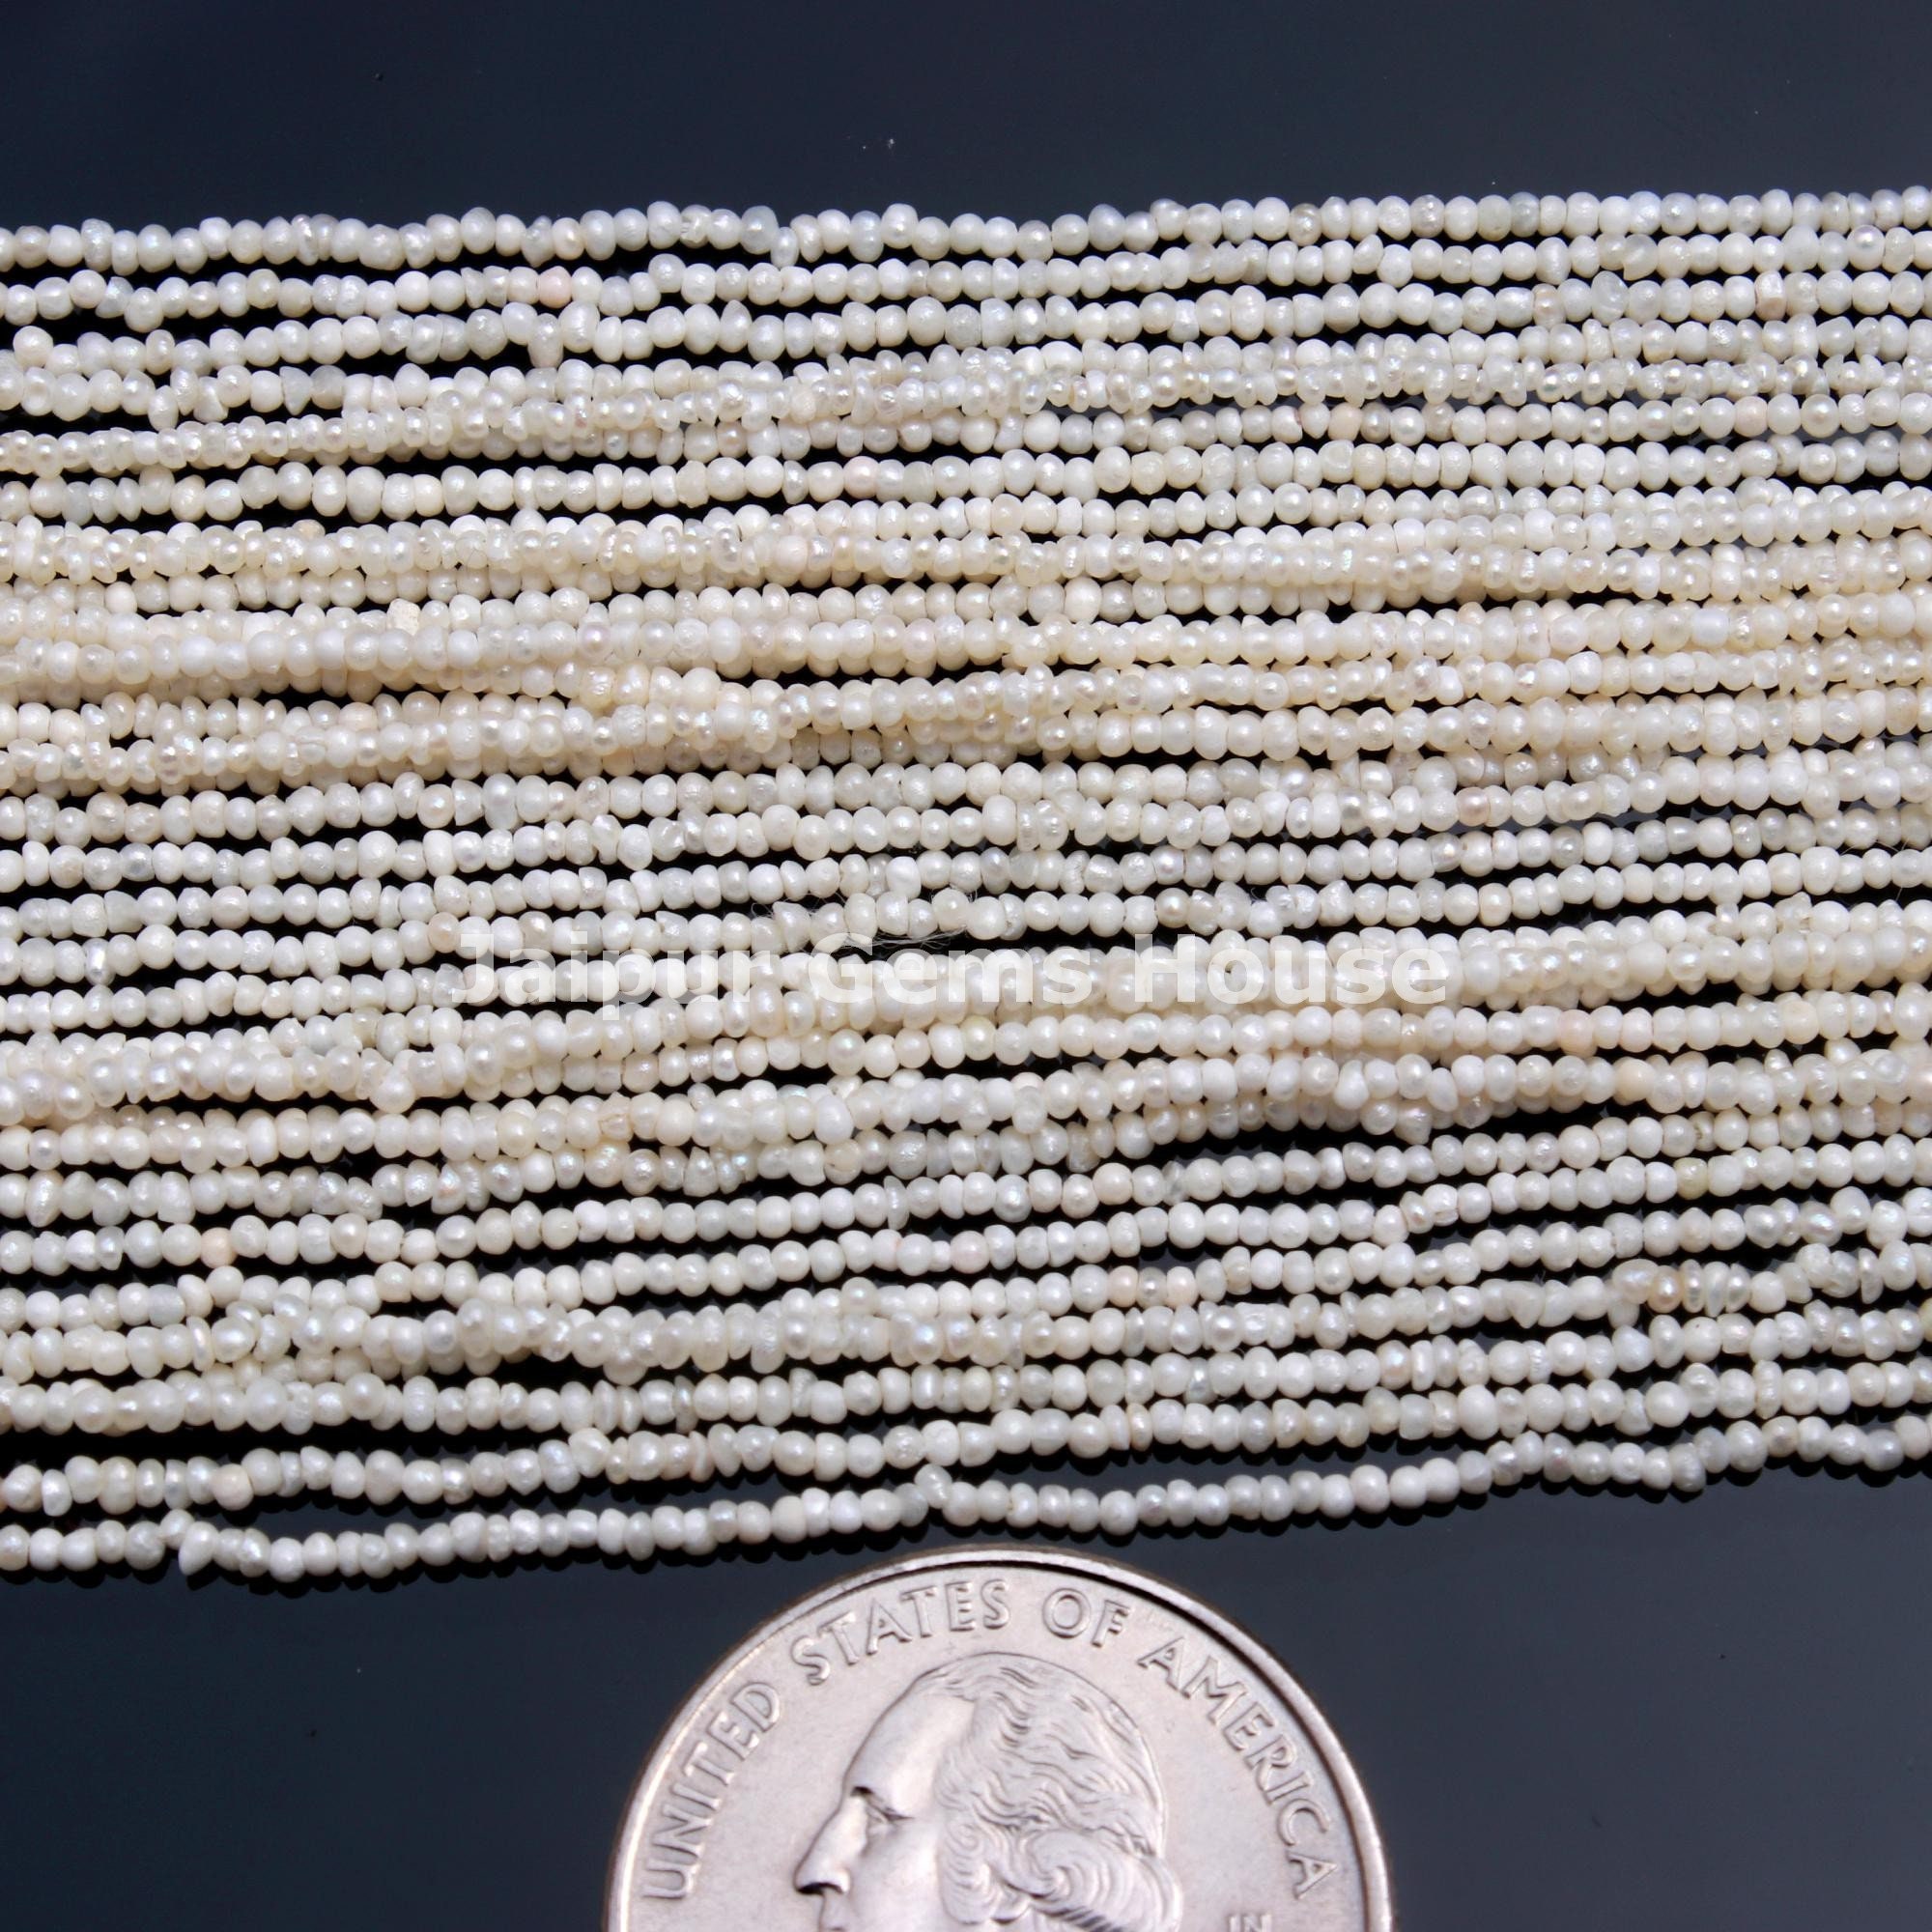 Tiny Natural White Seed Pearls - 1.5-2mm Freshwater Pearl Beads